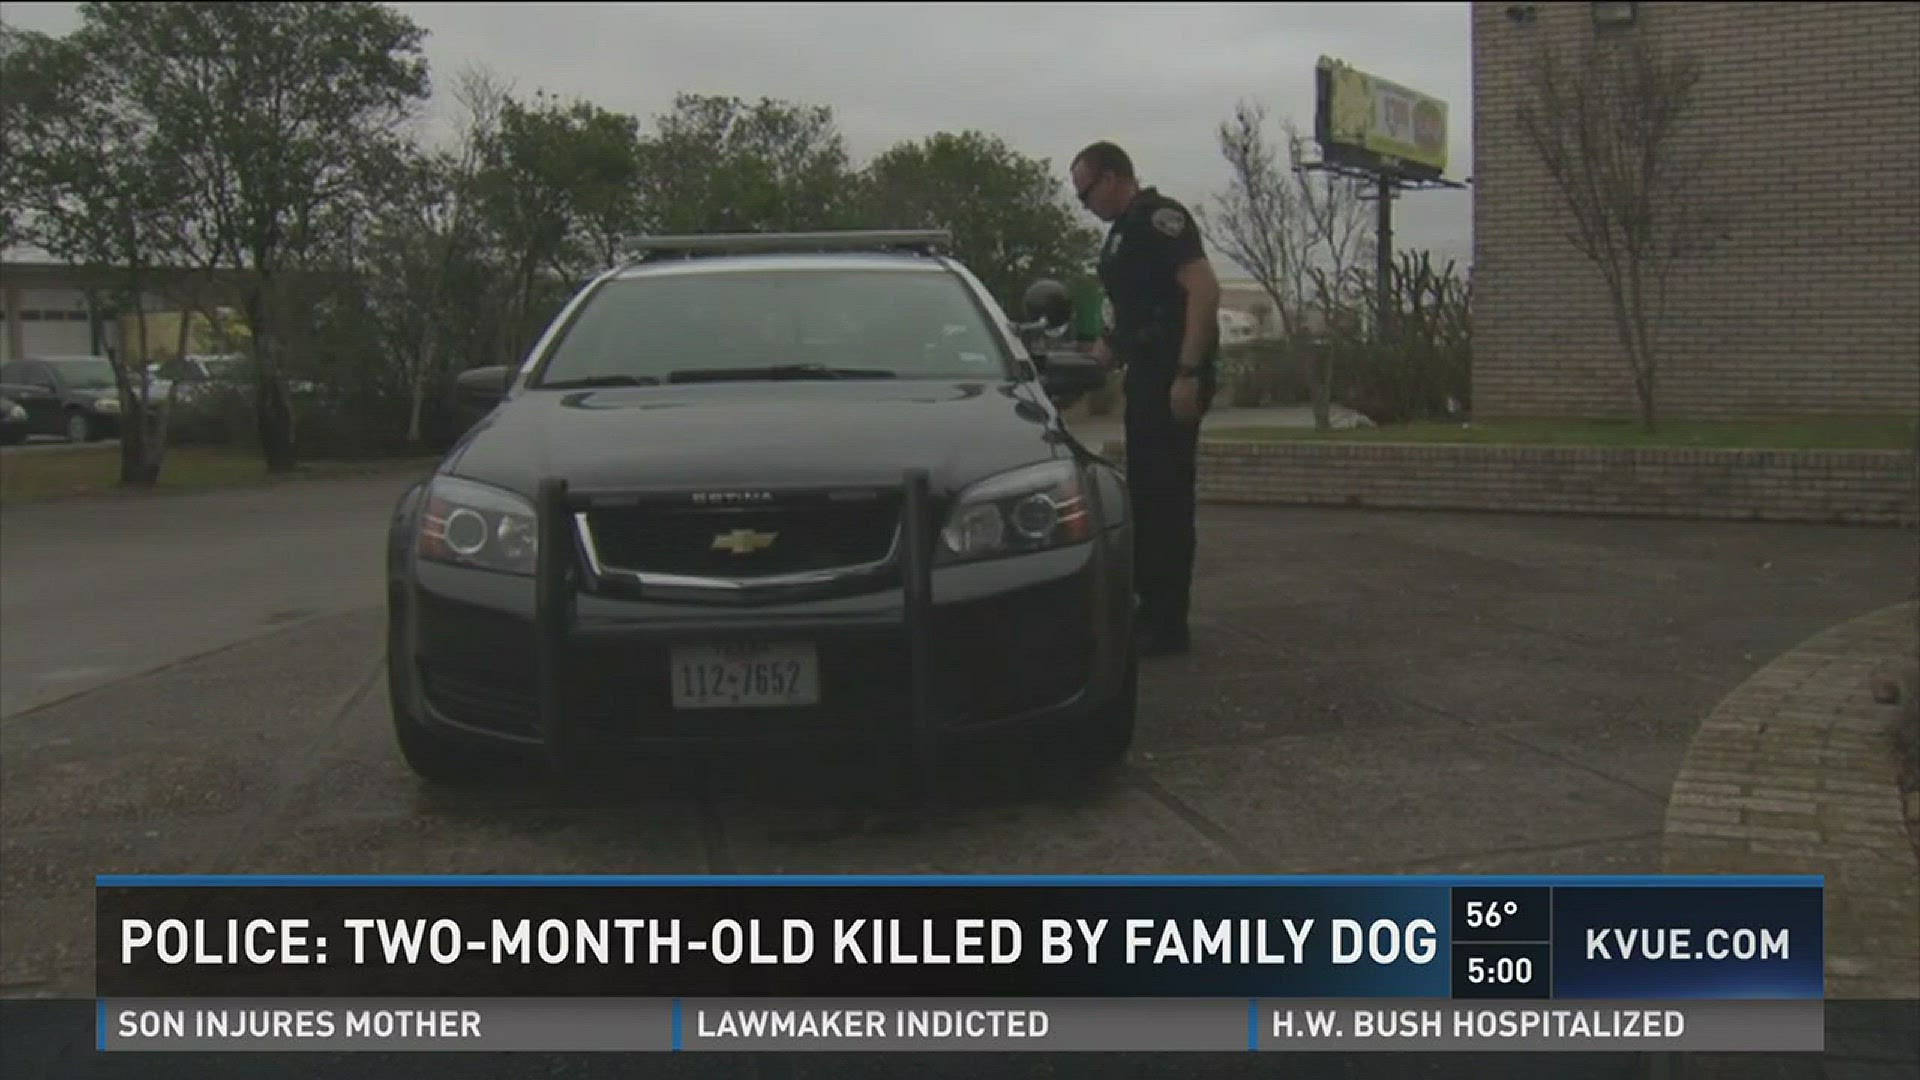 Police: 2-month-old killed by family dog